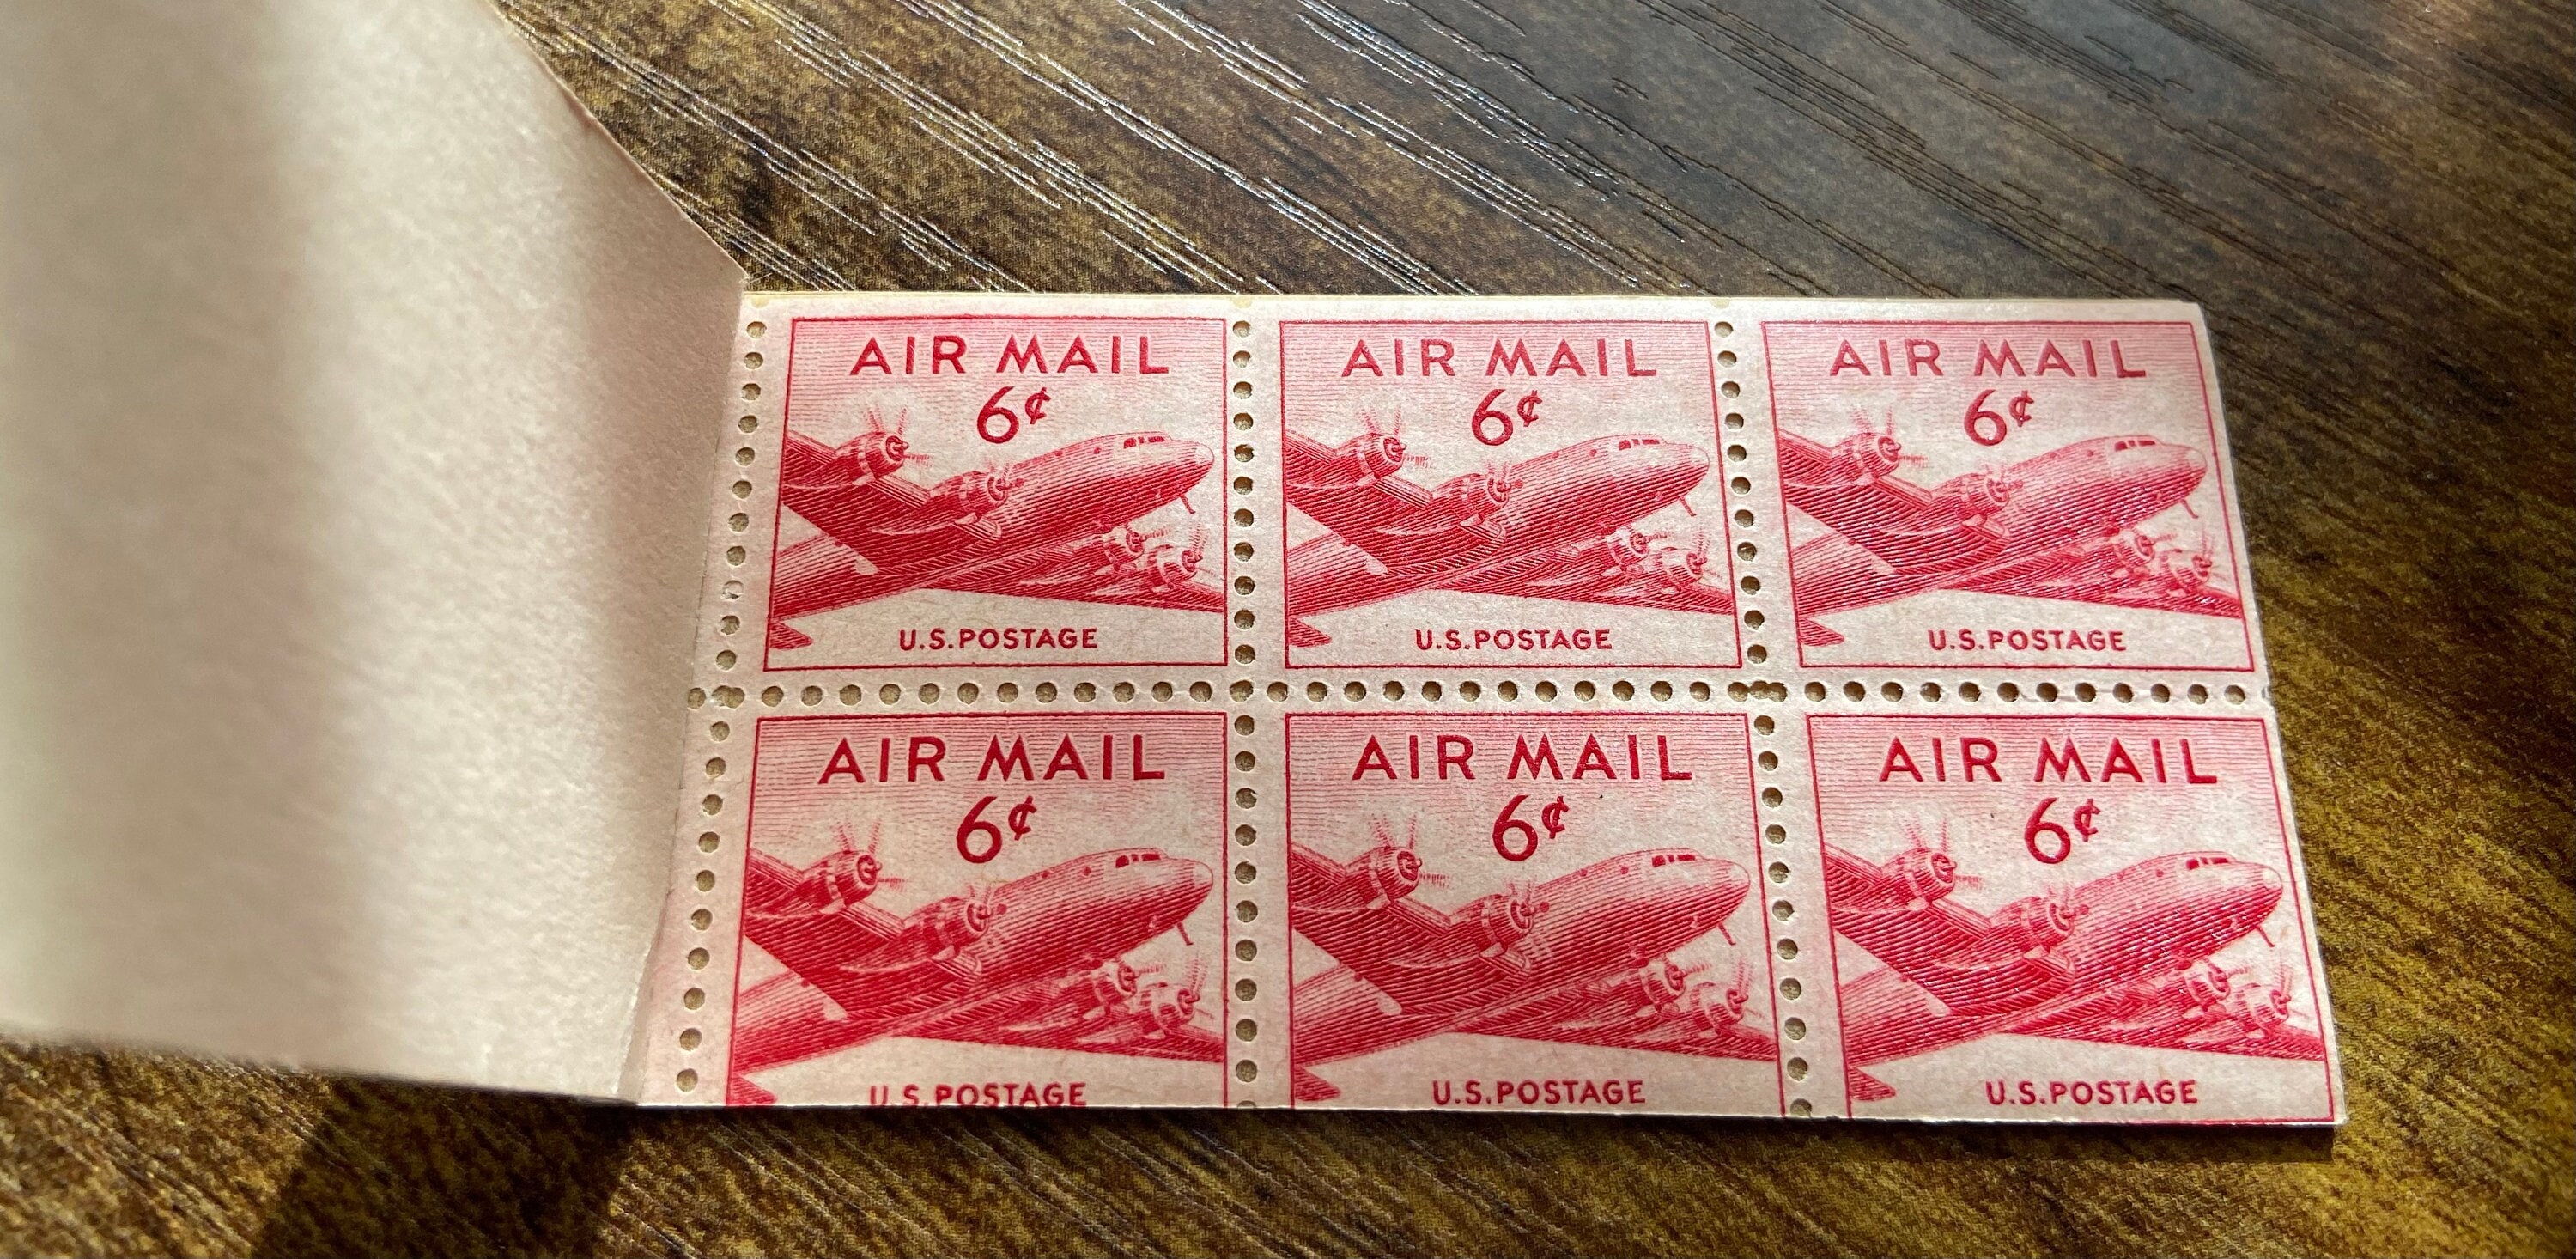 Lot - RARE 3 Cent Liberty, 6 Cent Air Mail Stamps